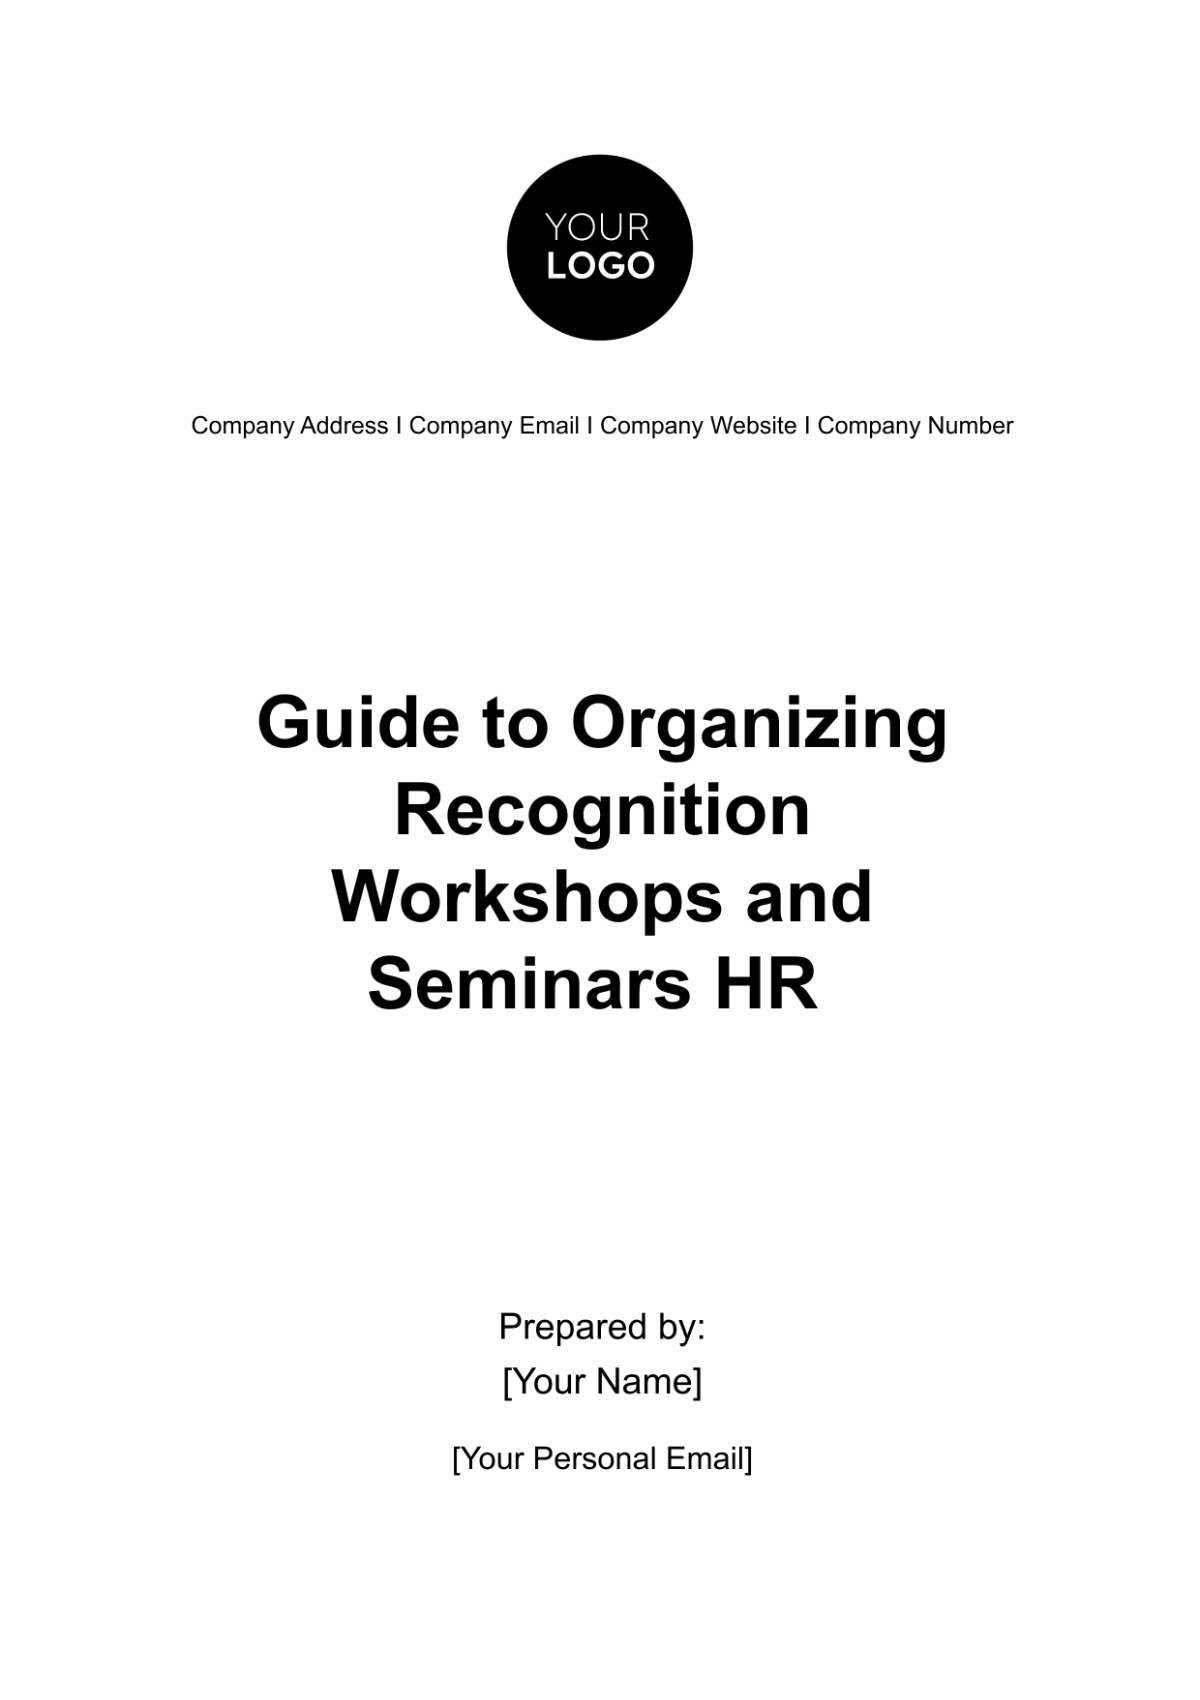 Guide to Organizing Recognition Workshops and Seminars HR Template